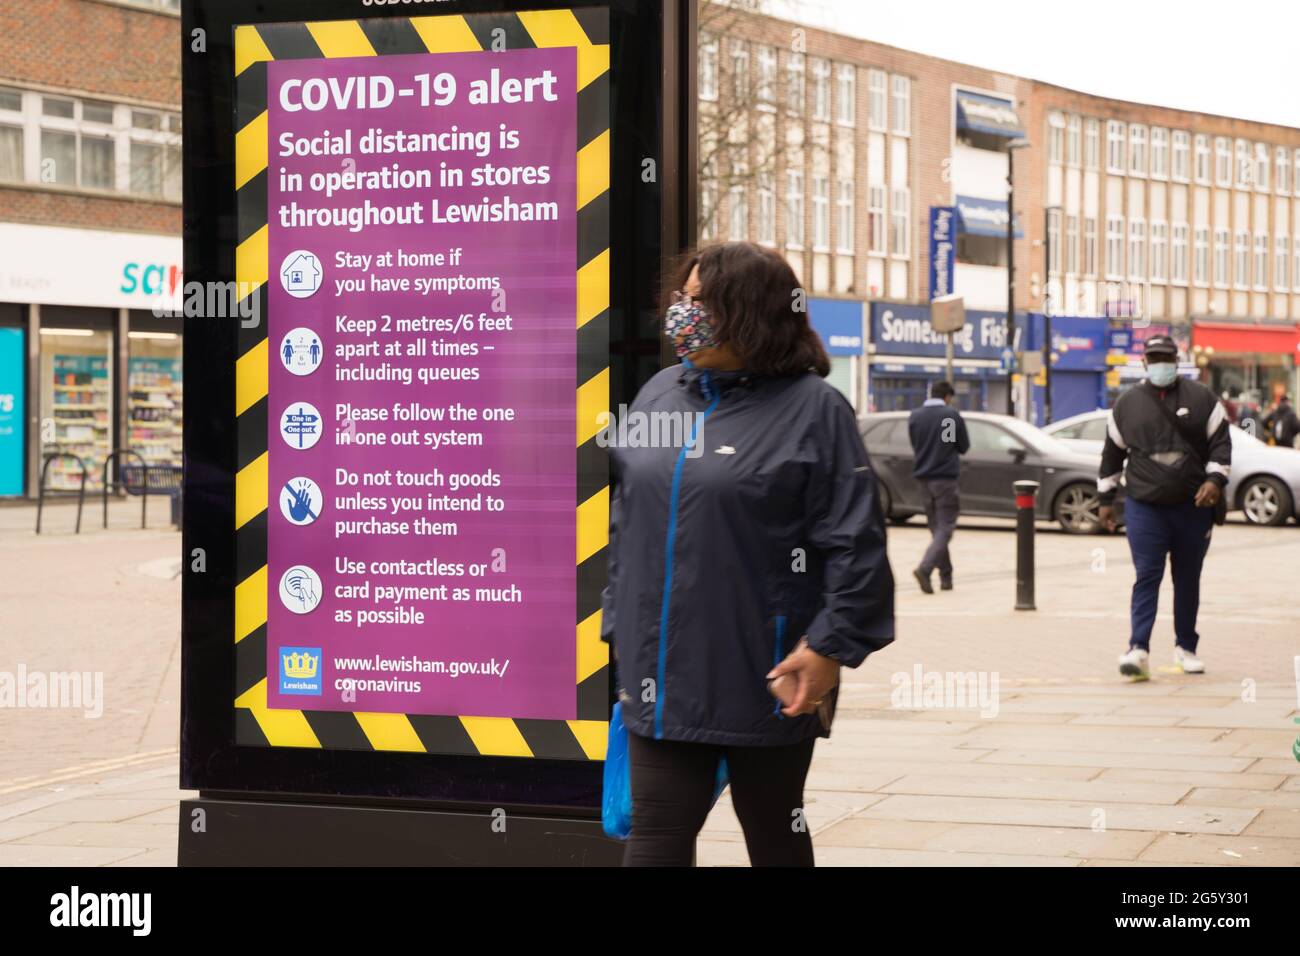 COVID-10 alert message on giant LED screen in high street Lewisham , London, England, Europe, woman wears face mask with her shopping in hand Stock Photo